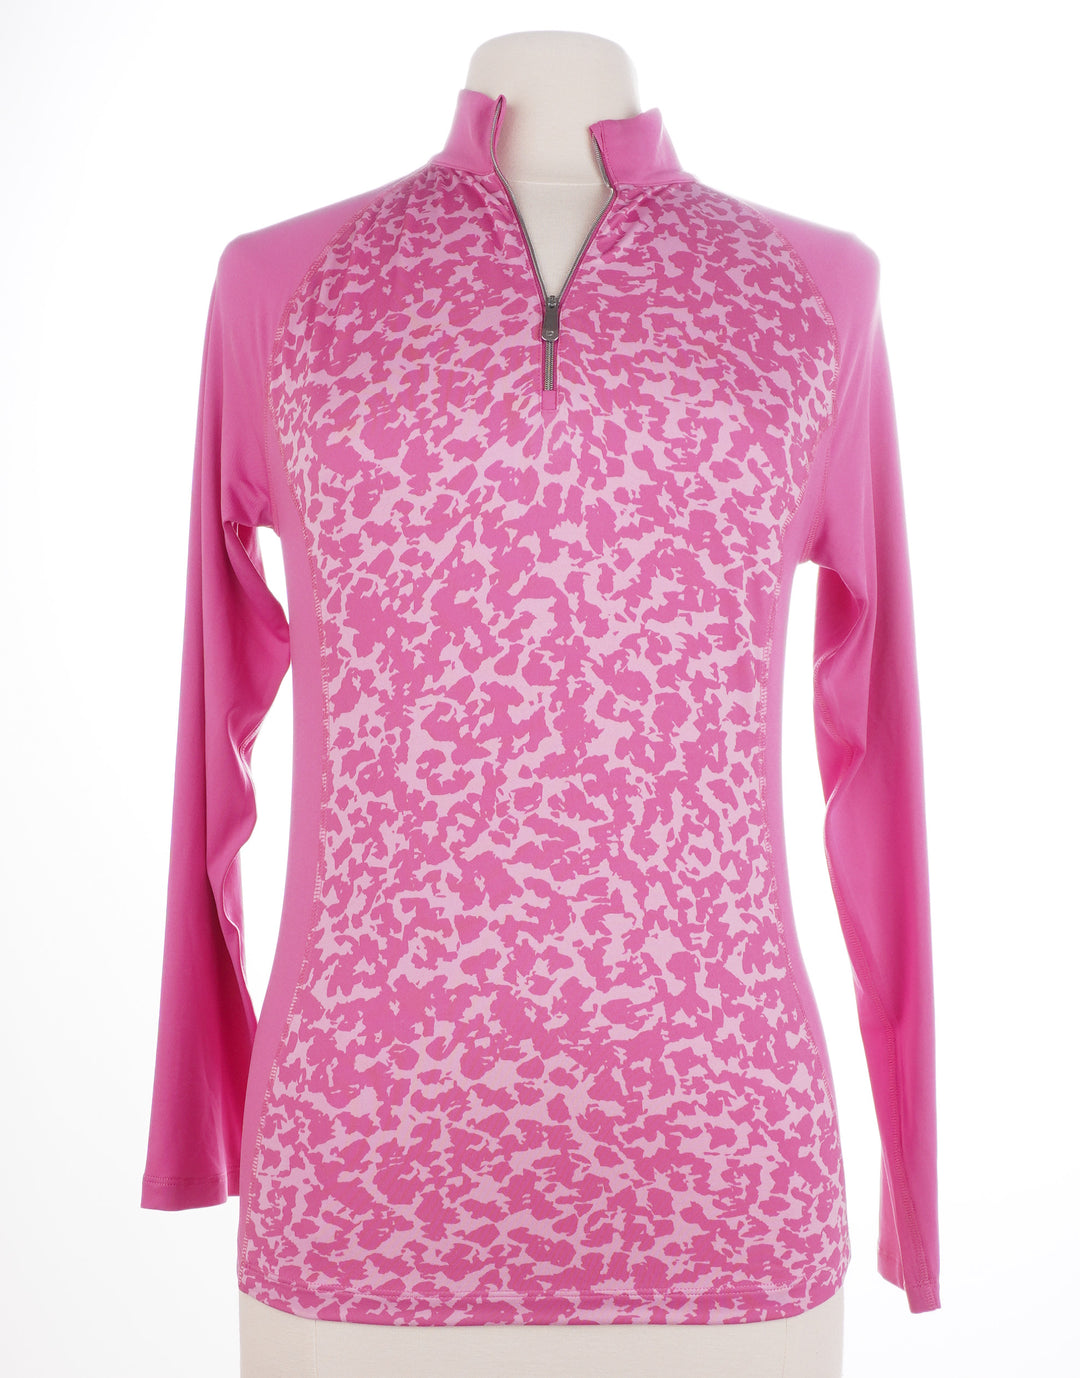 Dunning Golf Ayla Jersey Performance Long Sleeve - Lily- Size Small - Skorzie